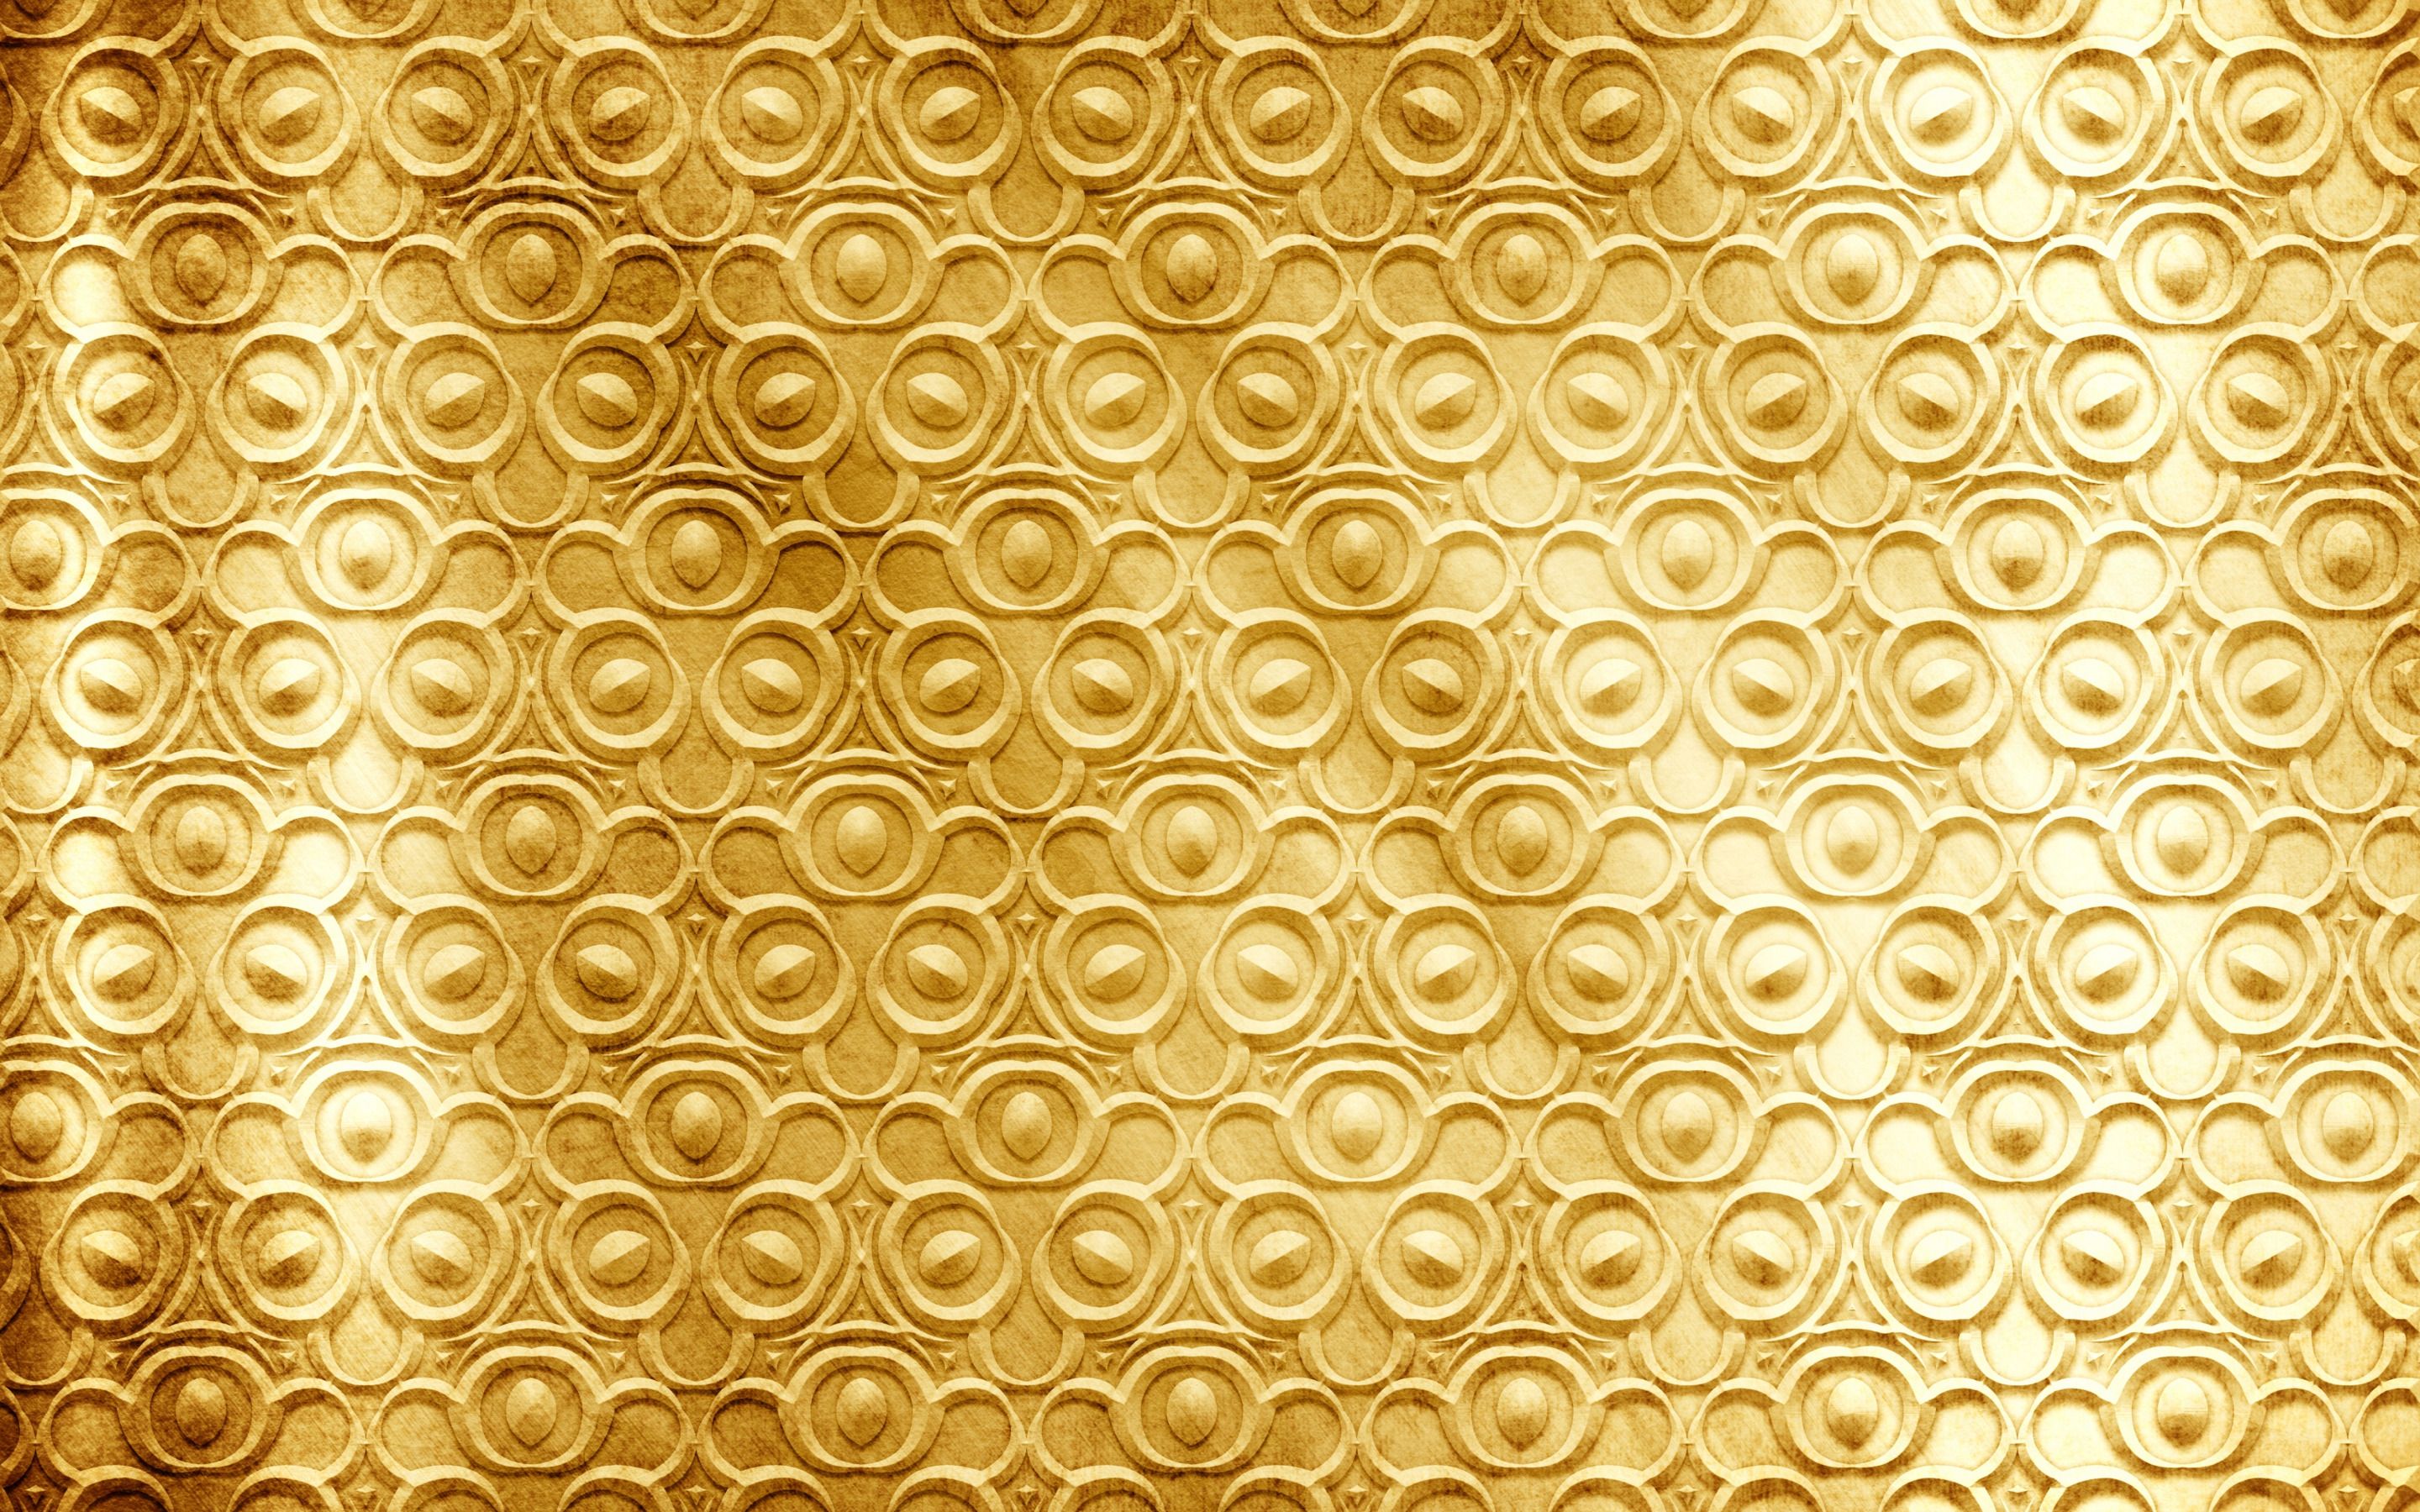 Download wallpaper gold texture with ornaments, luxury golden